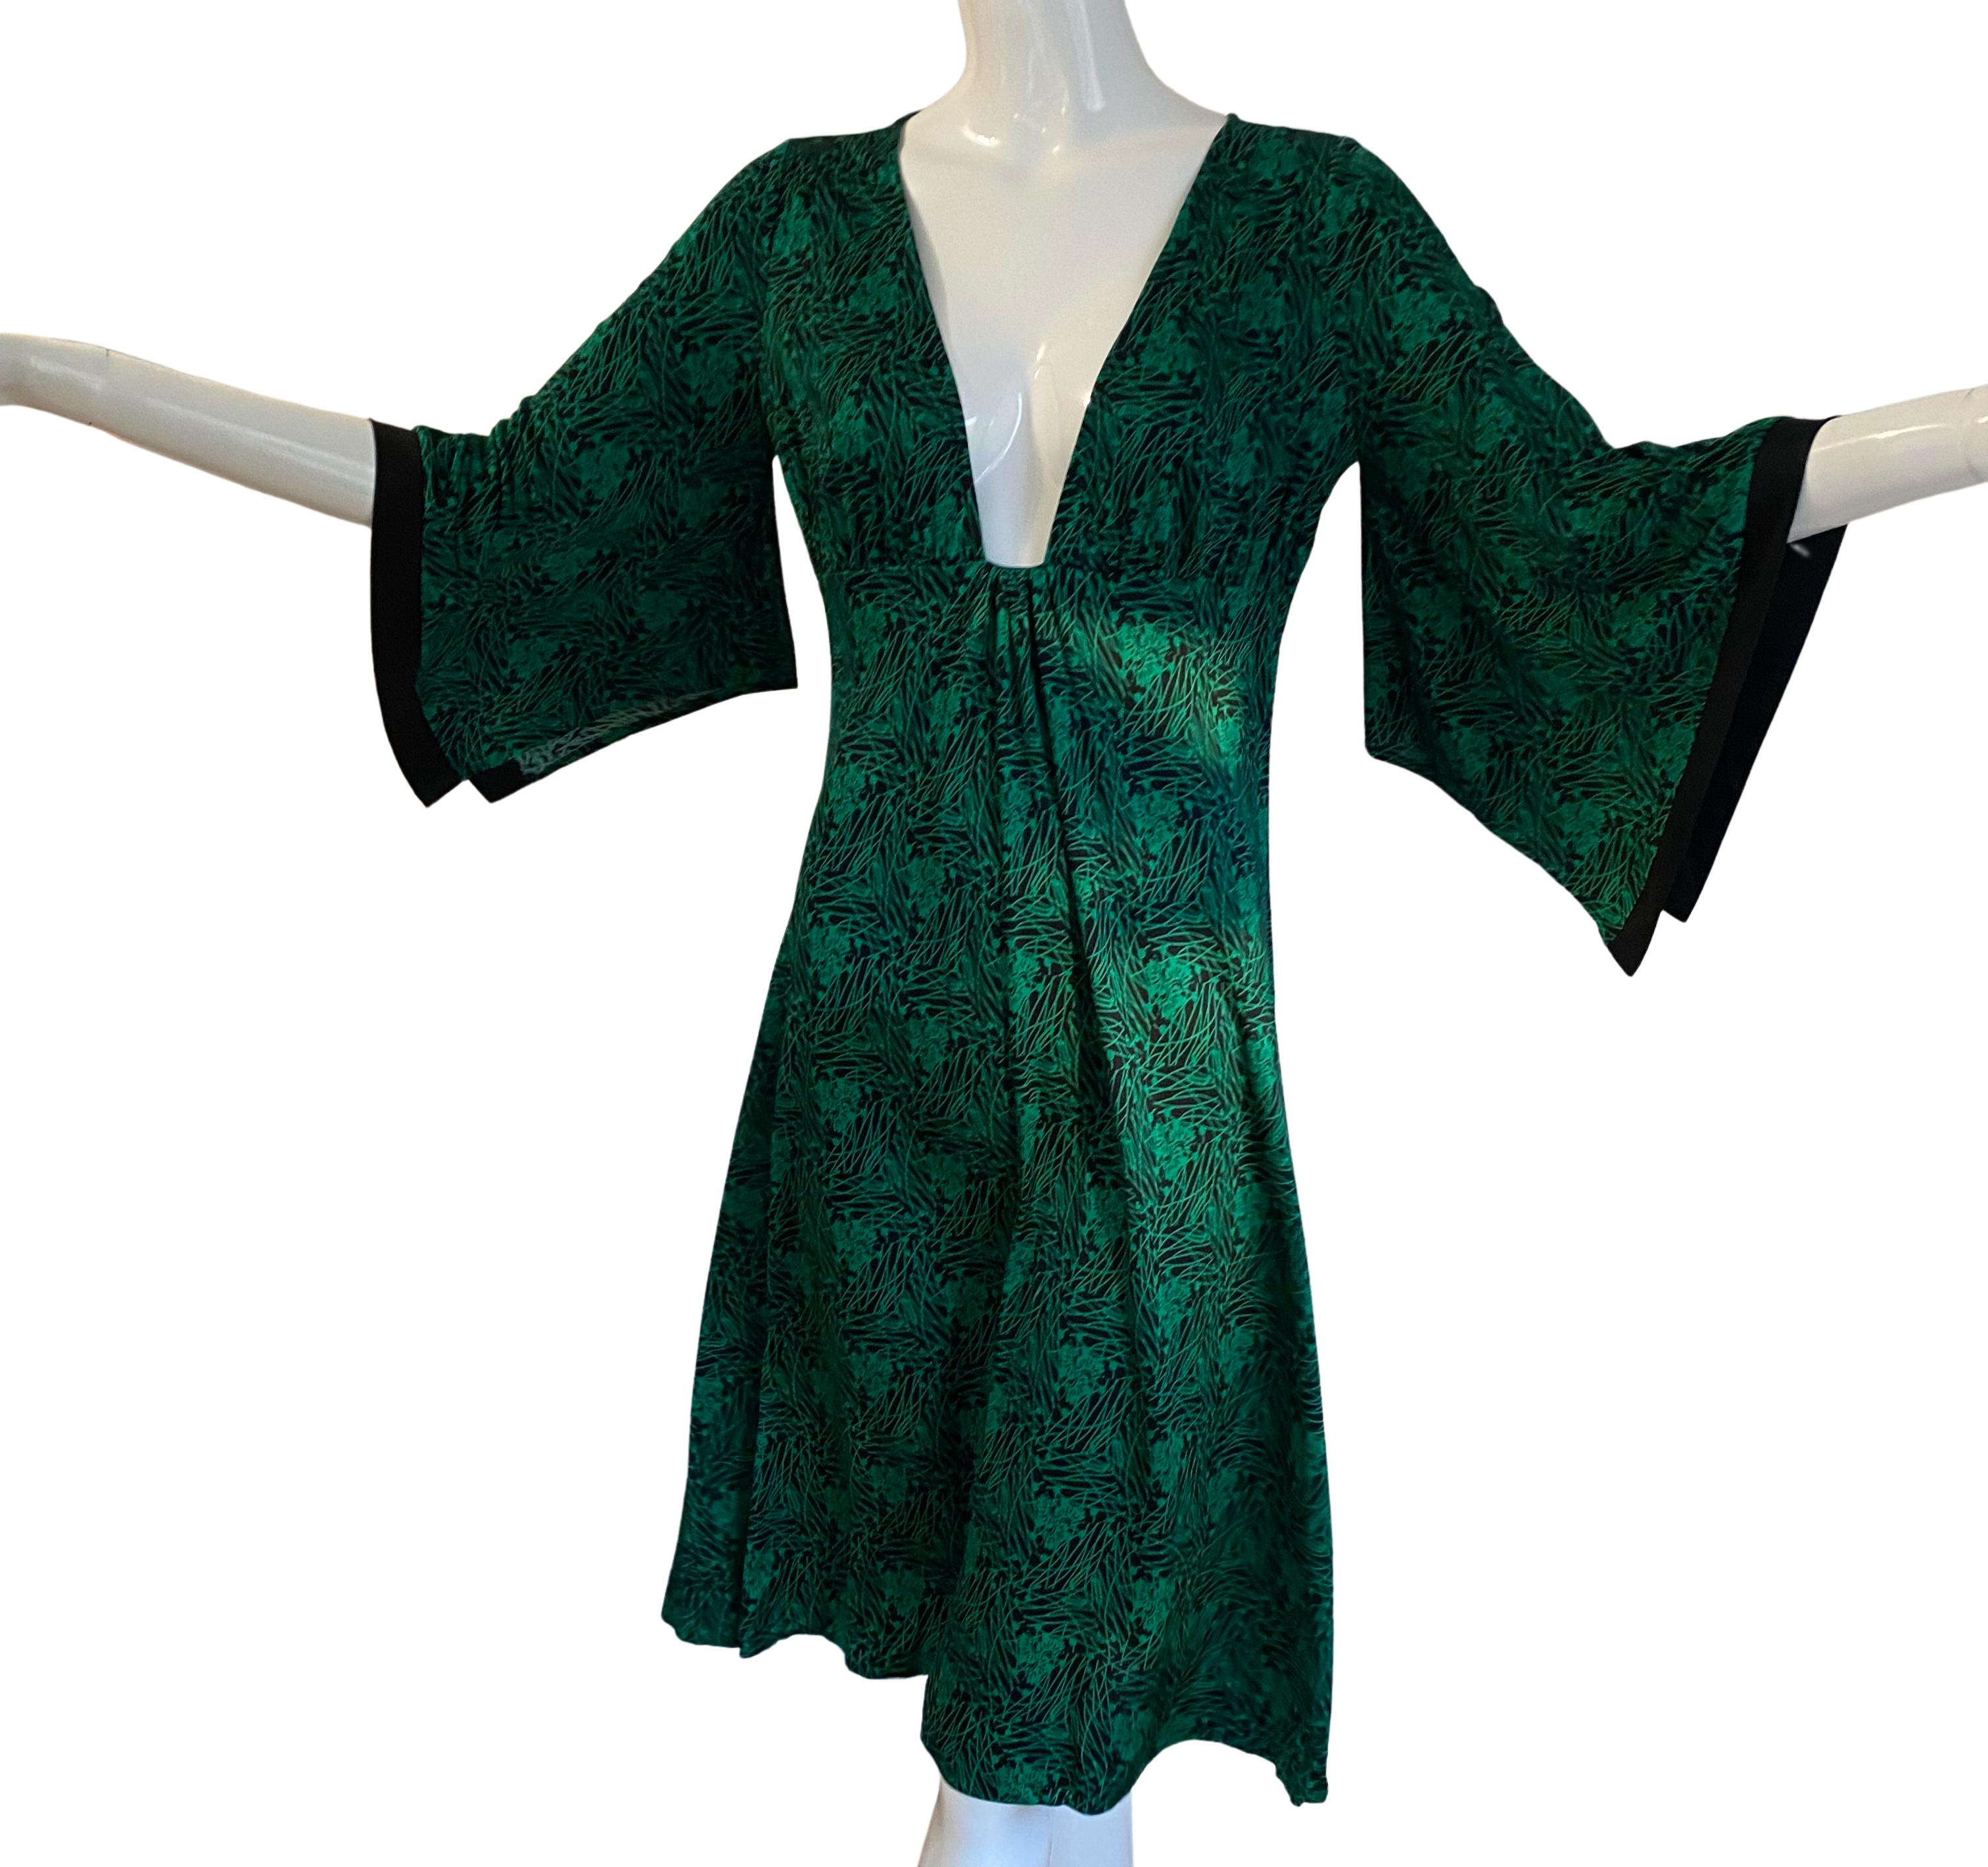 Condition: NEW WITH TAG.
Deep plunge V-neck.
kimono sleeves.
Exclusive Wood Block print in black on emerald green designed by Flora.

Approximately 43